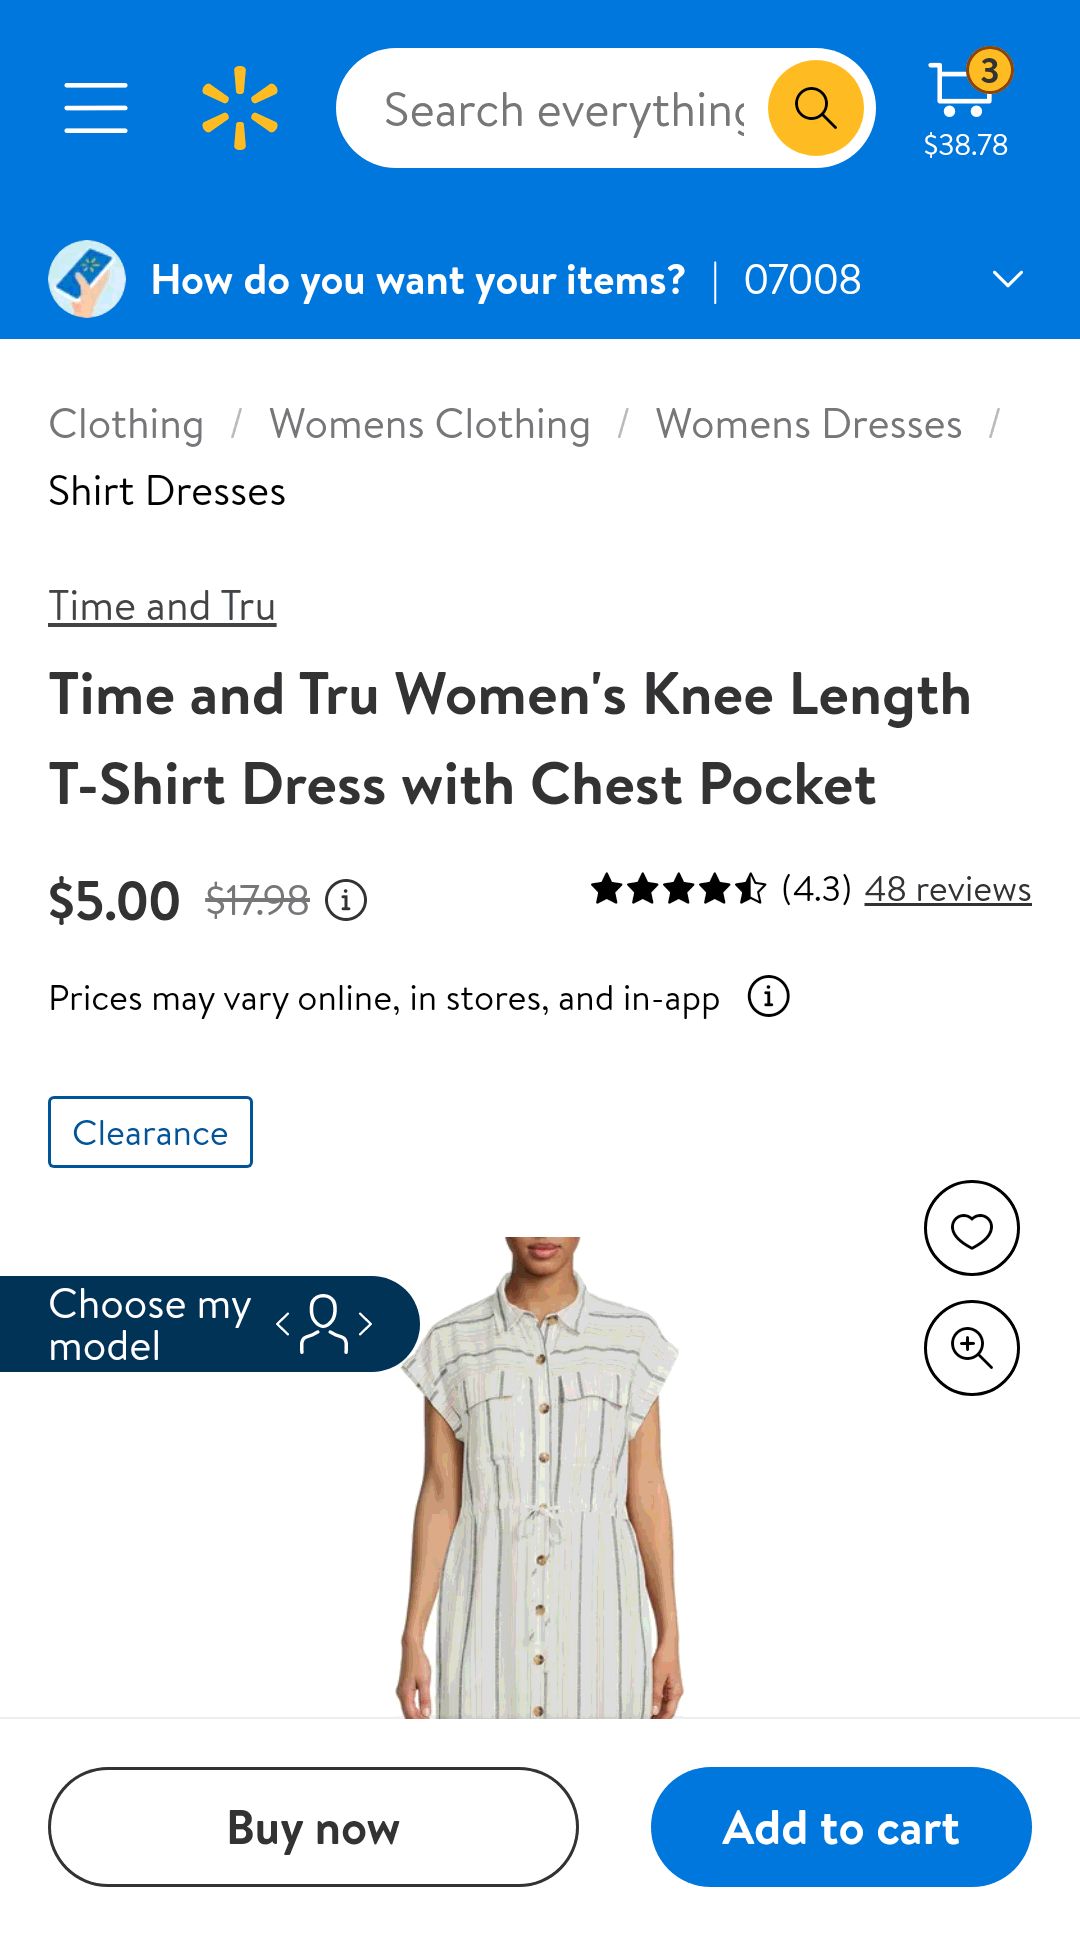 Time and Tru Women's Knee Length T-Shirt Dress with Chest Pocket - T恤连体裙